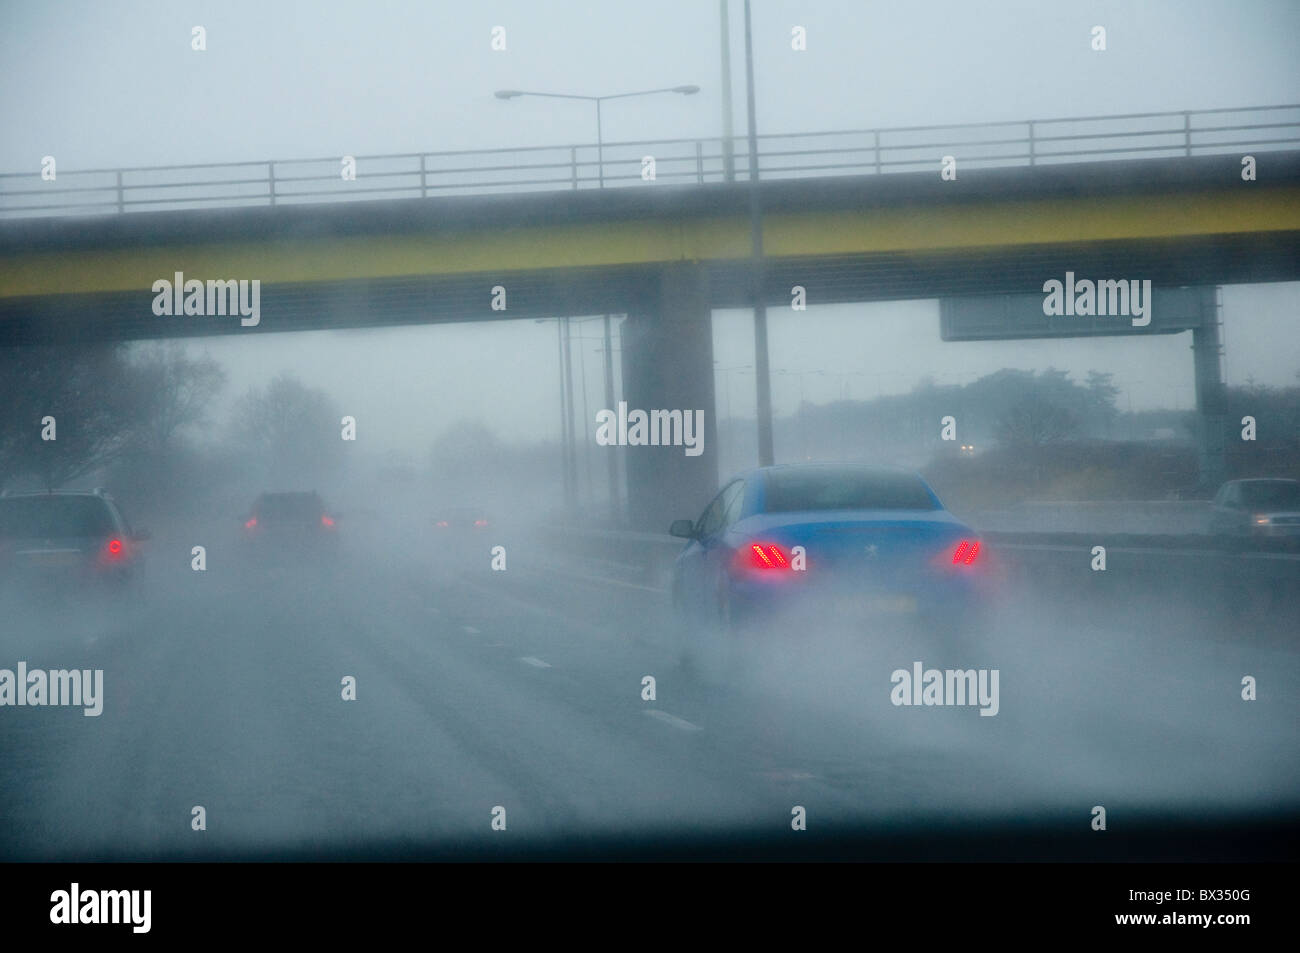 Drivers view through a car windscreen showing difficult driving conditions, and poor visibility (spray and fog) on a motorway. Stock Photo